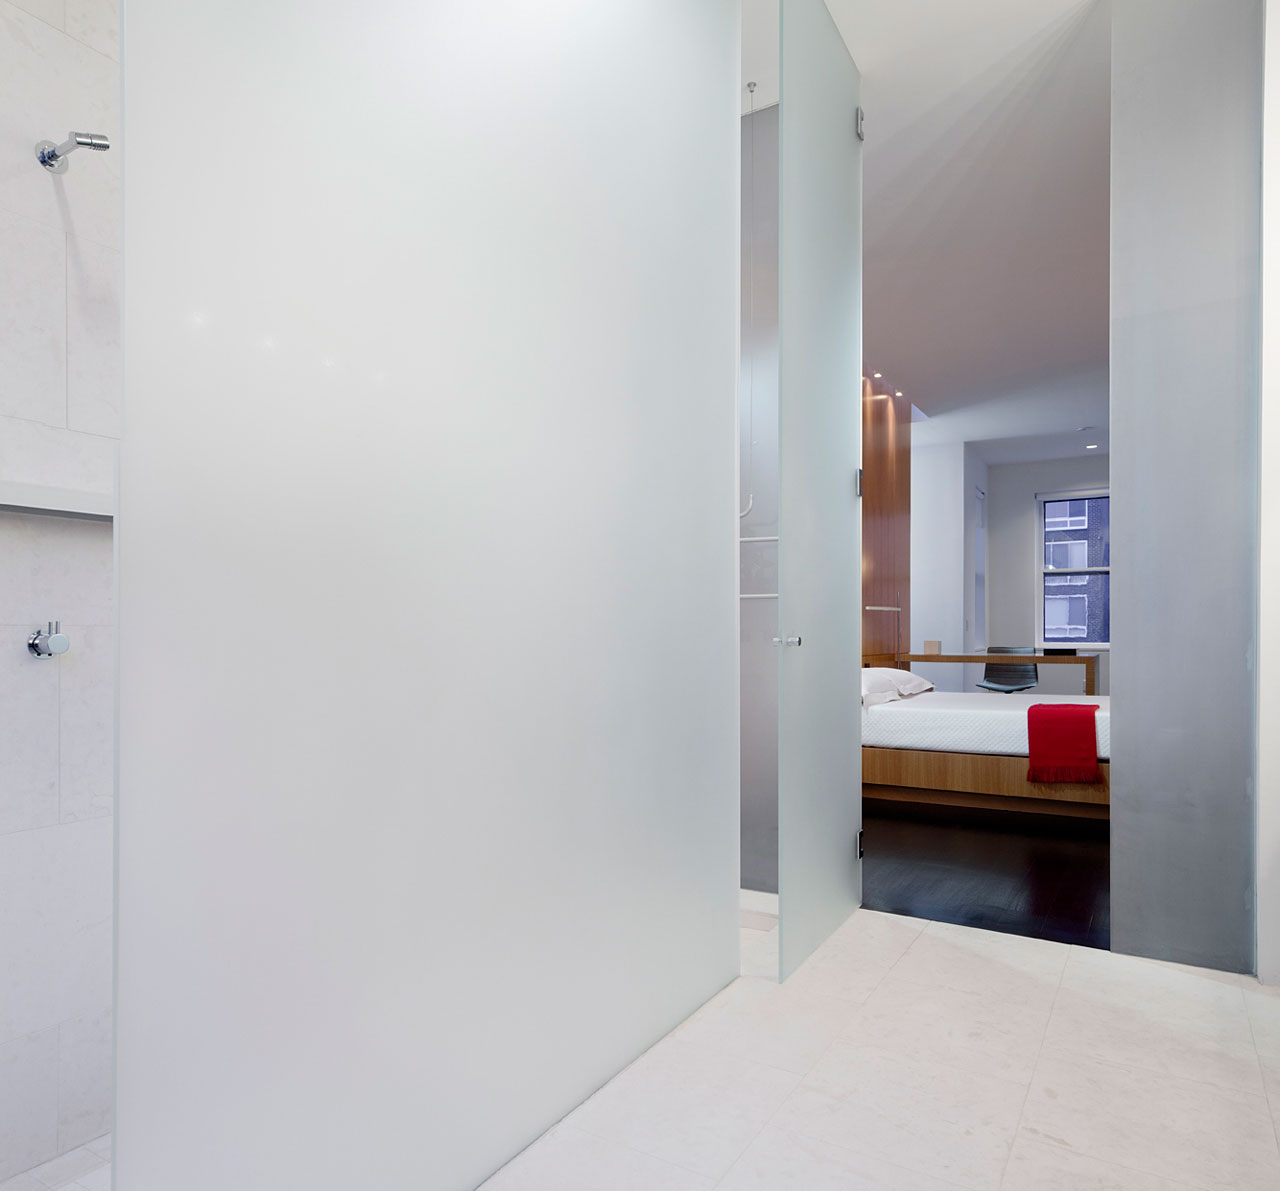 Glass Door Modern Frosted Glass Door And Wall Modern Bathroom Design For Small Spaces With White Interior Color Decorating Ideas Architecture Elegant Row House With Open Plan Contemporary Space